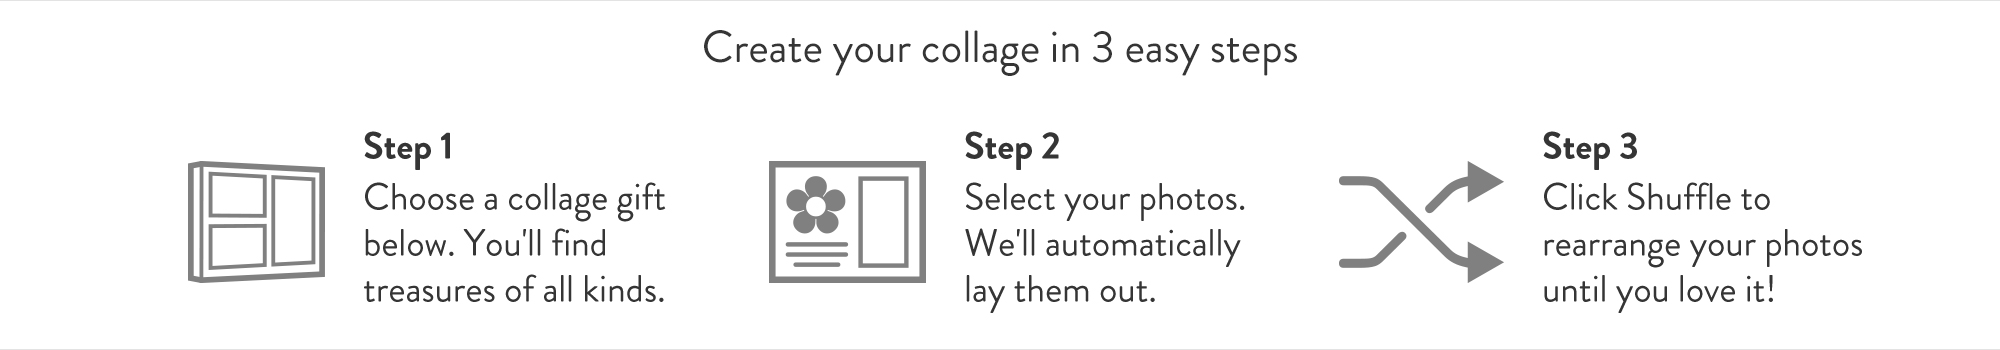 Collage gifts in 3 easy steps